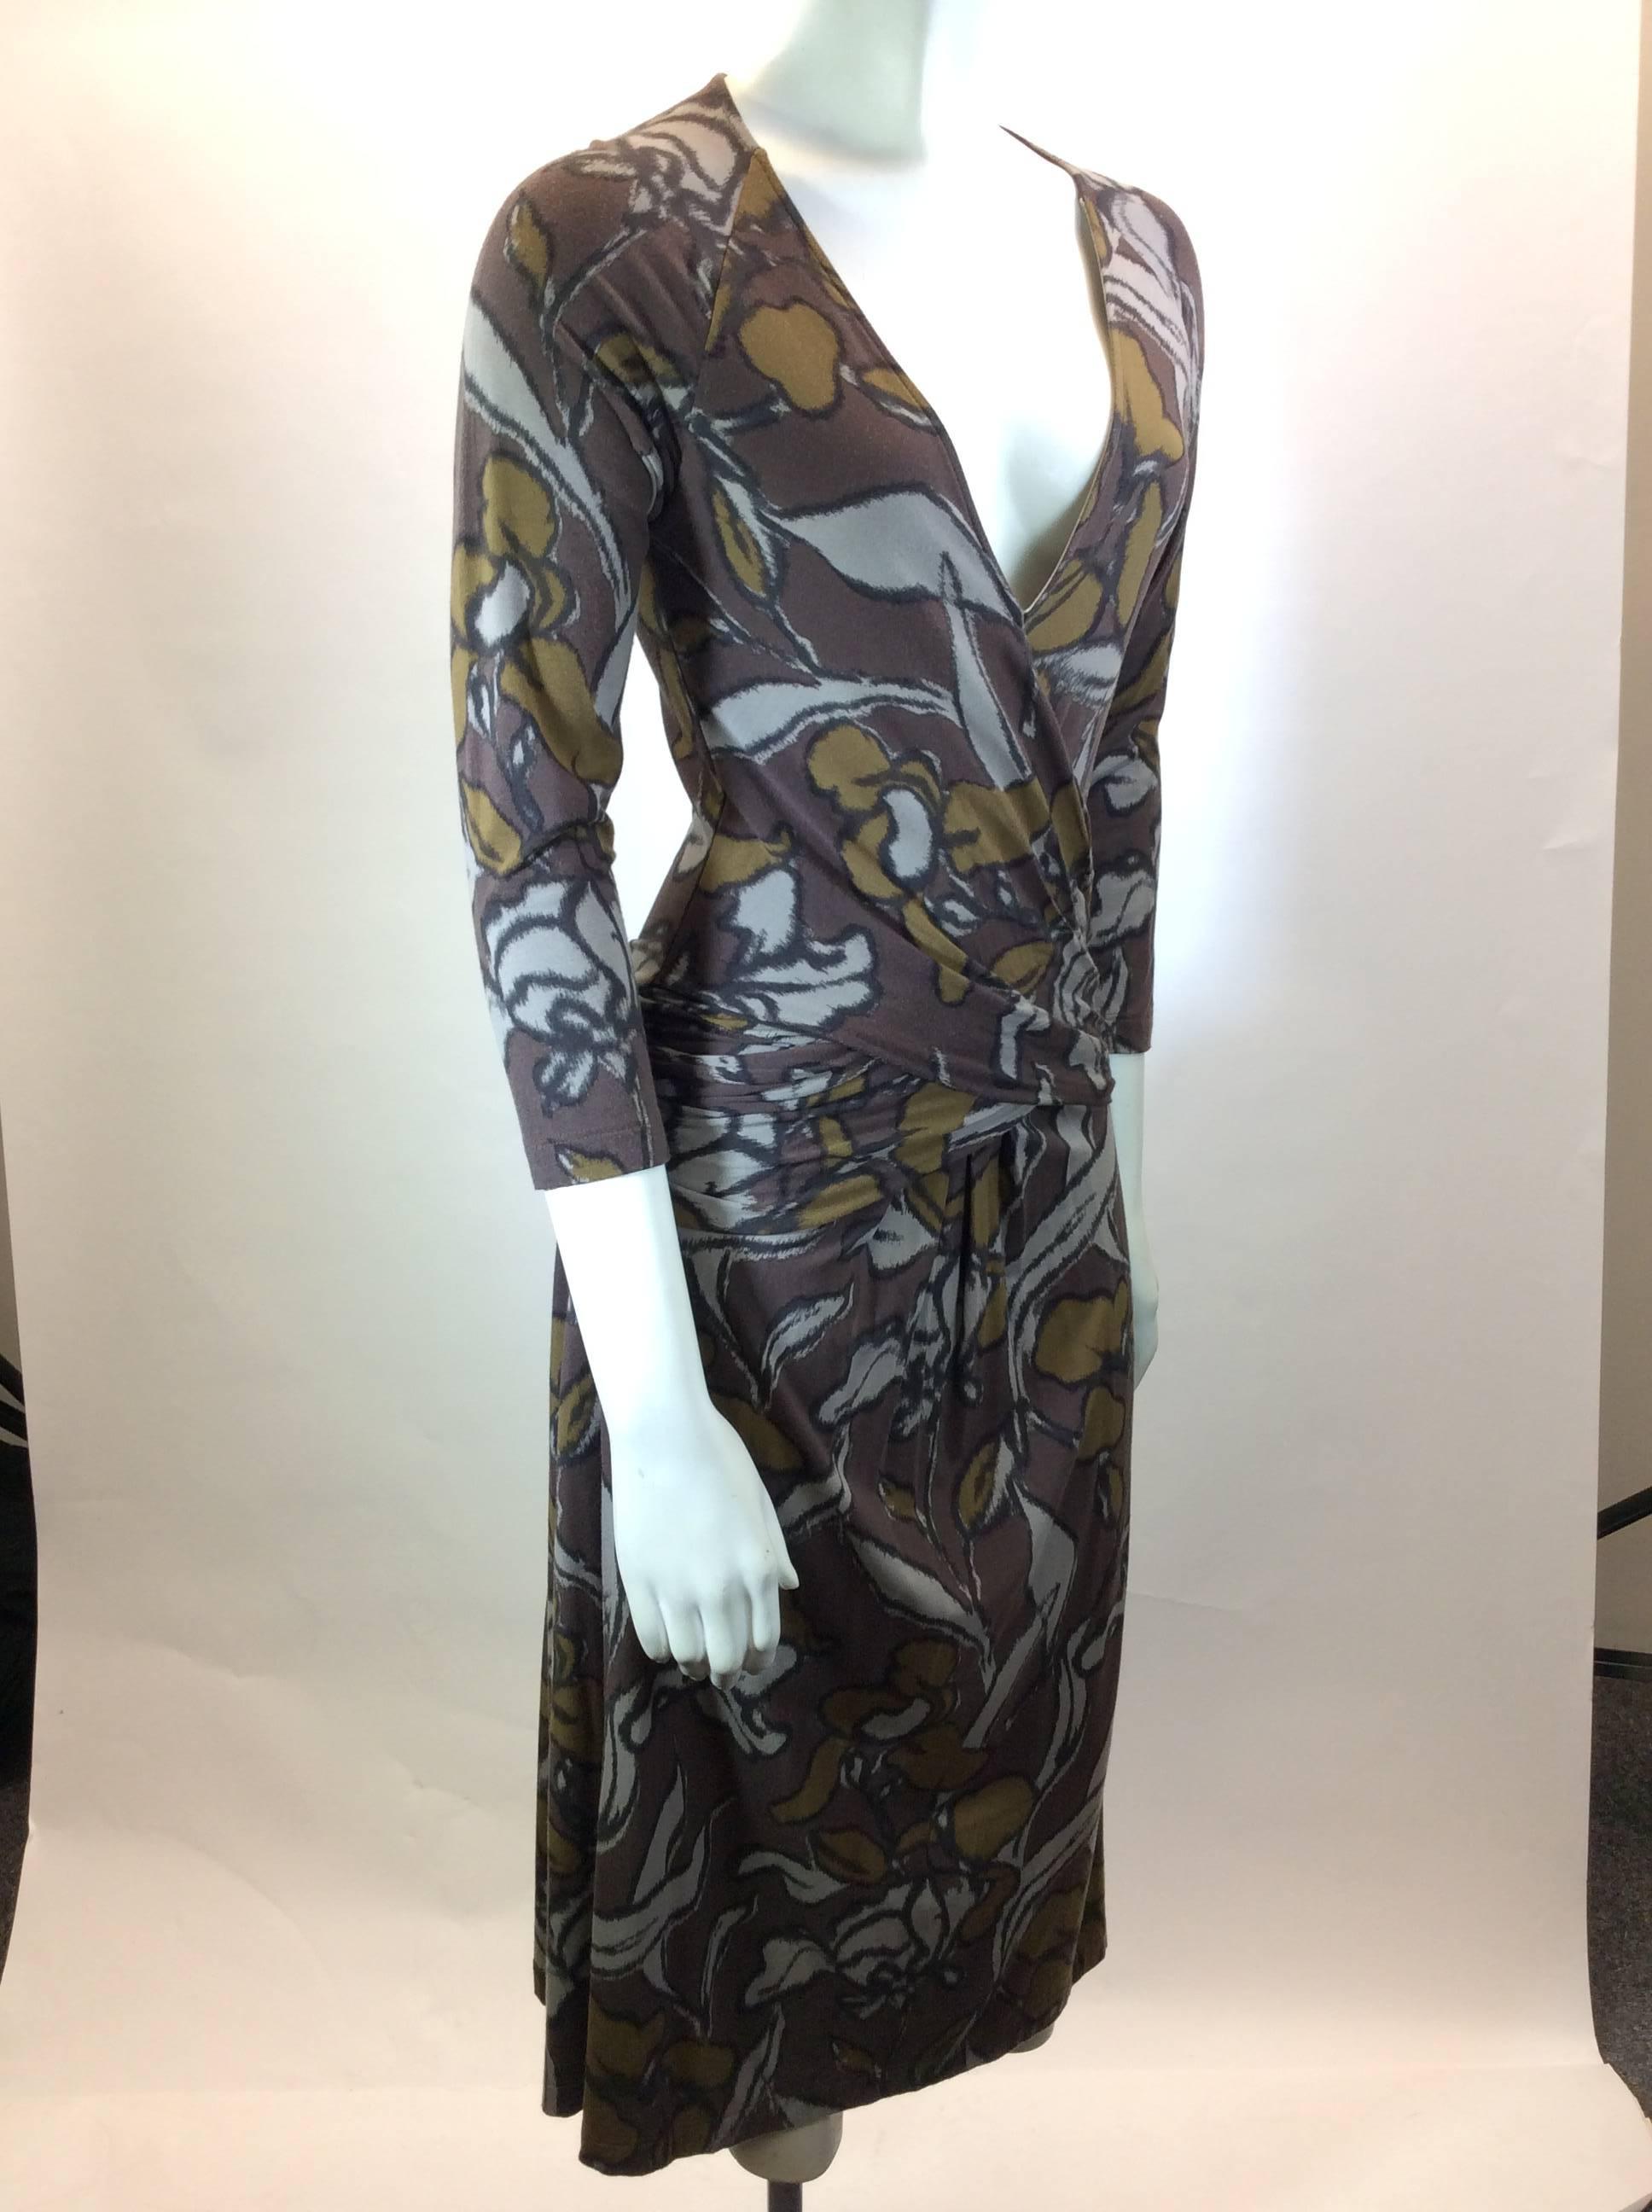 Brown and Grey Printed Dress
Wrap around tie at Back
Quarter Length Sleeves
EU Size 42
18.5" Inch Sleeve Length